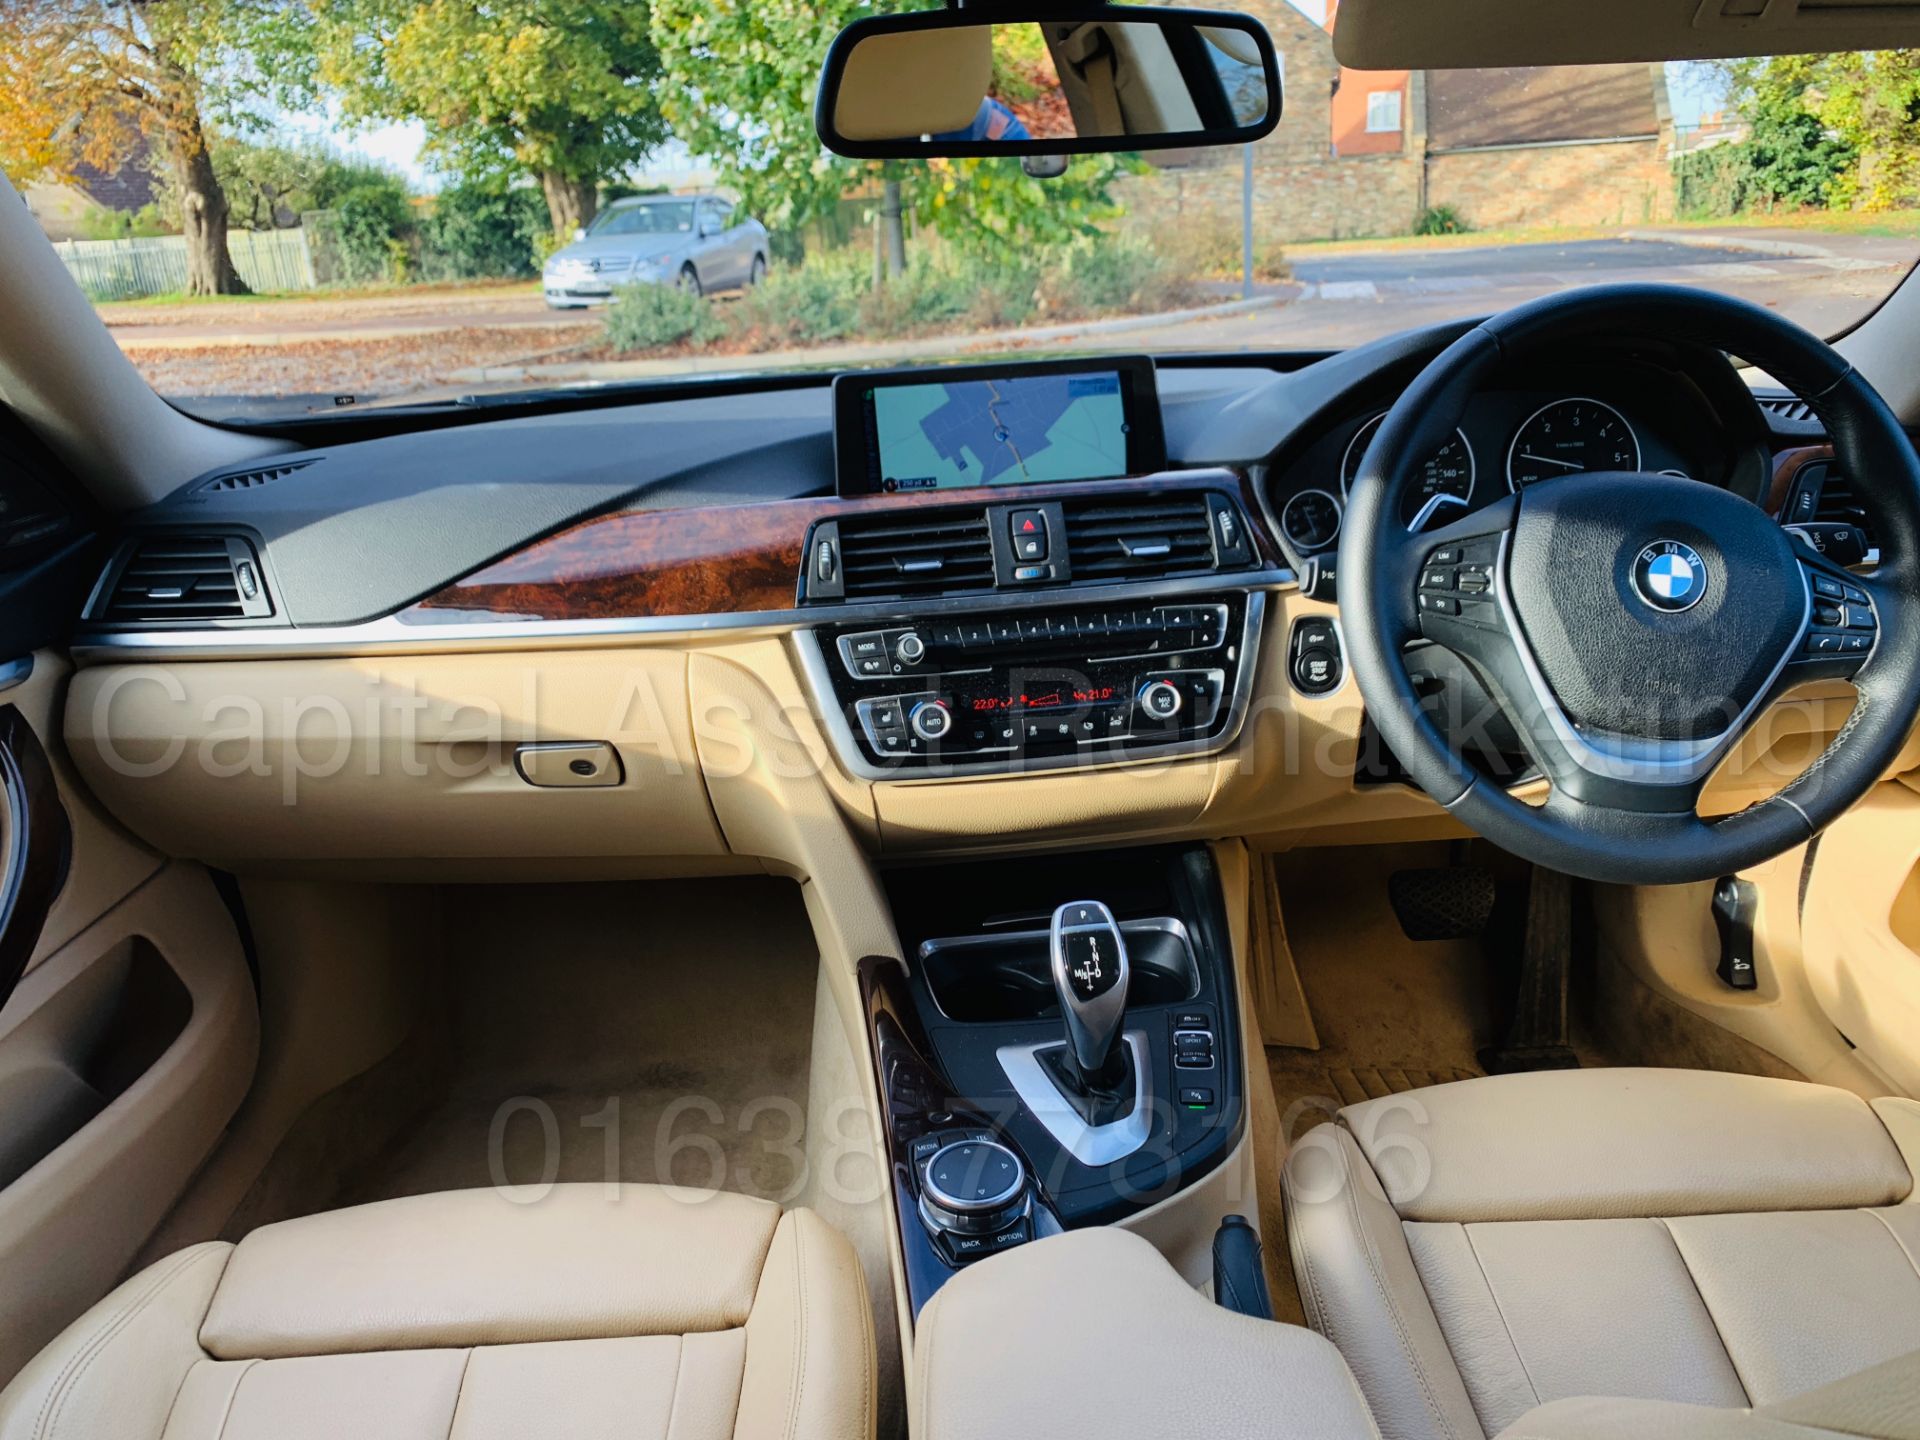 (ON SALE) BMW 430D 'X-DRIVE' GRAN COUPE *LUXURY EDITION* (2015) '8 SPEED AUTO' (1 OWNER) - Image 29 of 53